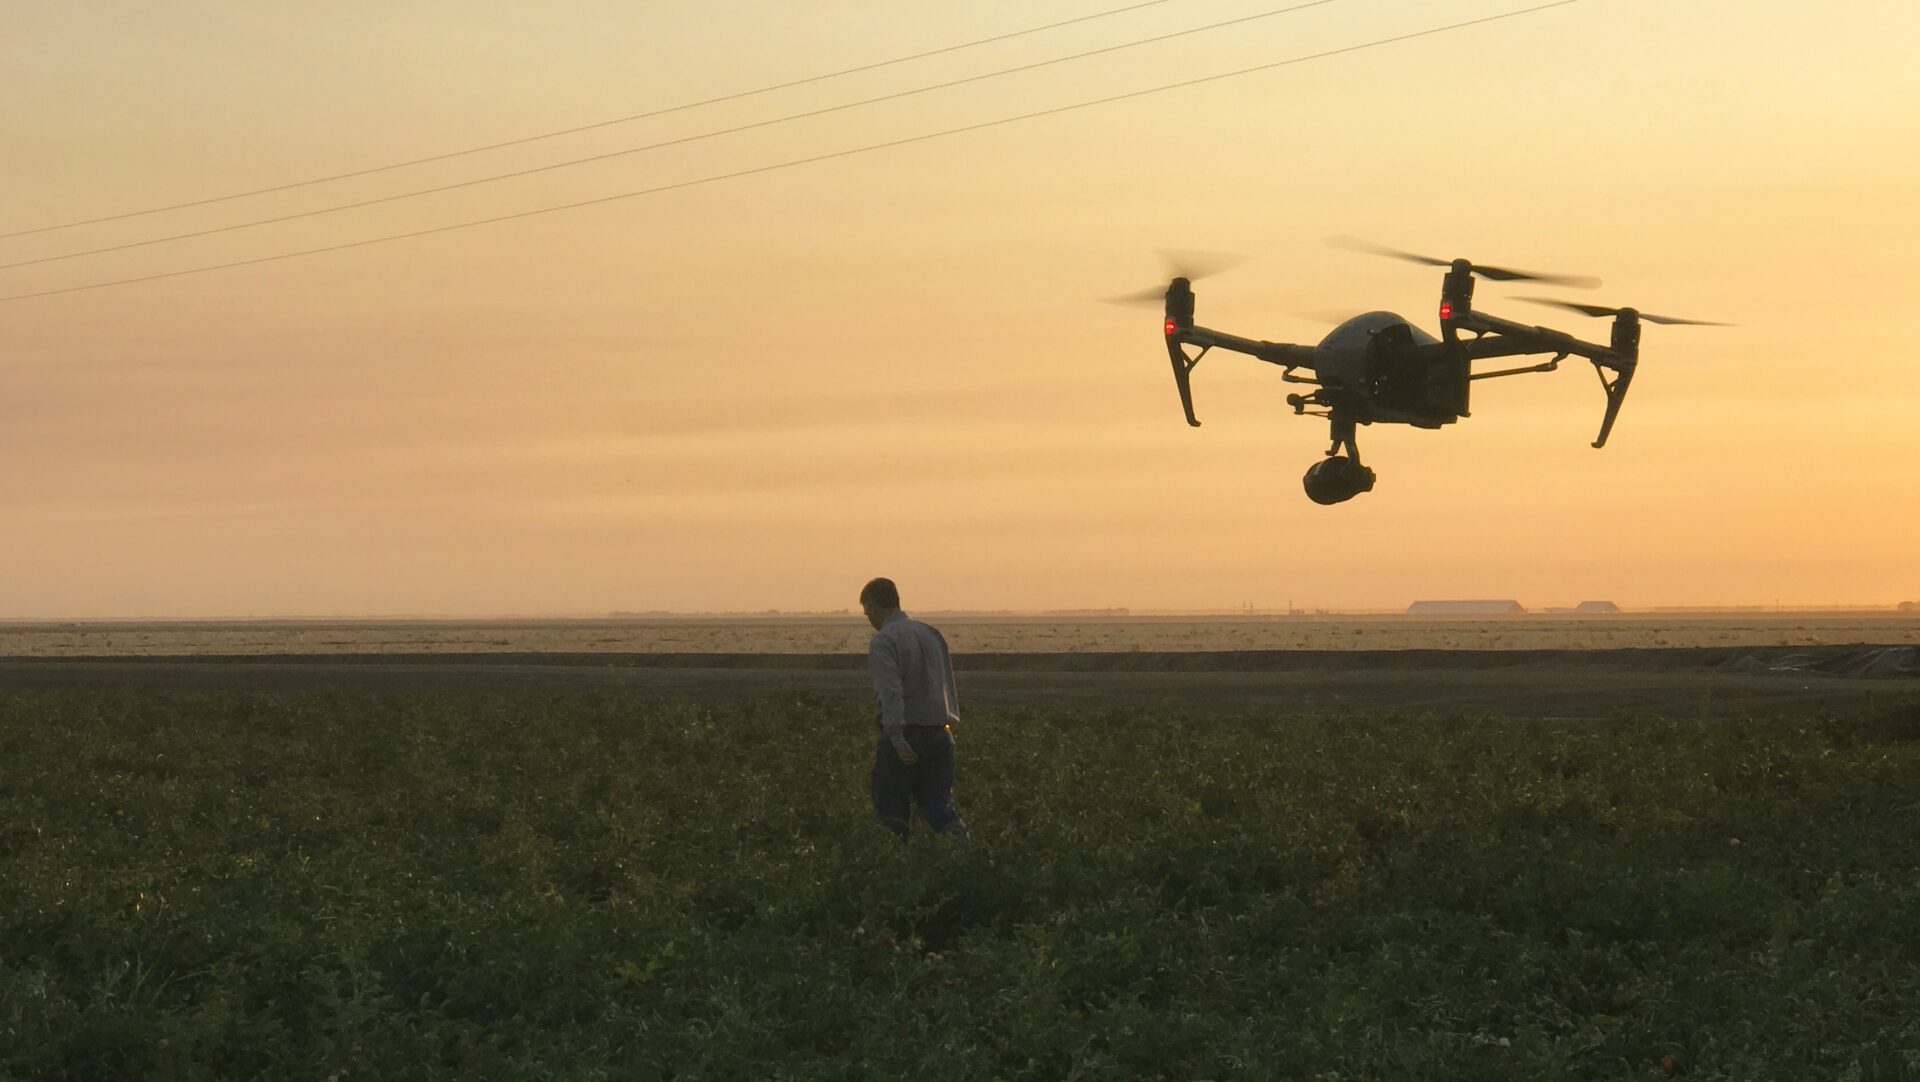 Camera drone following subject in a field at sunset